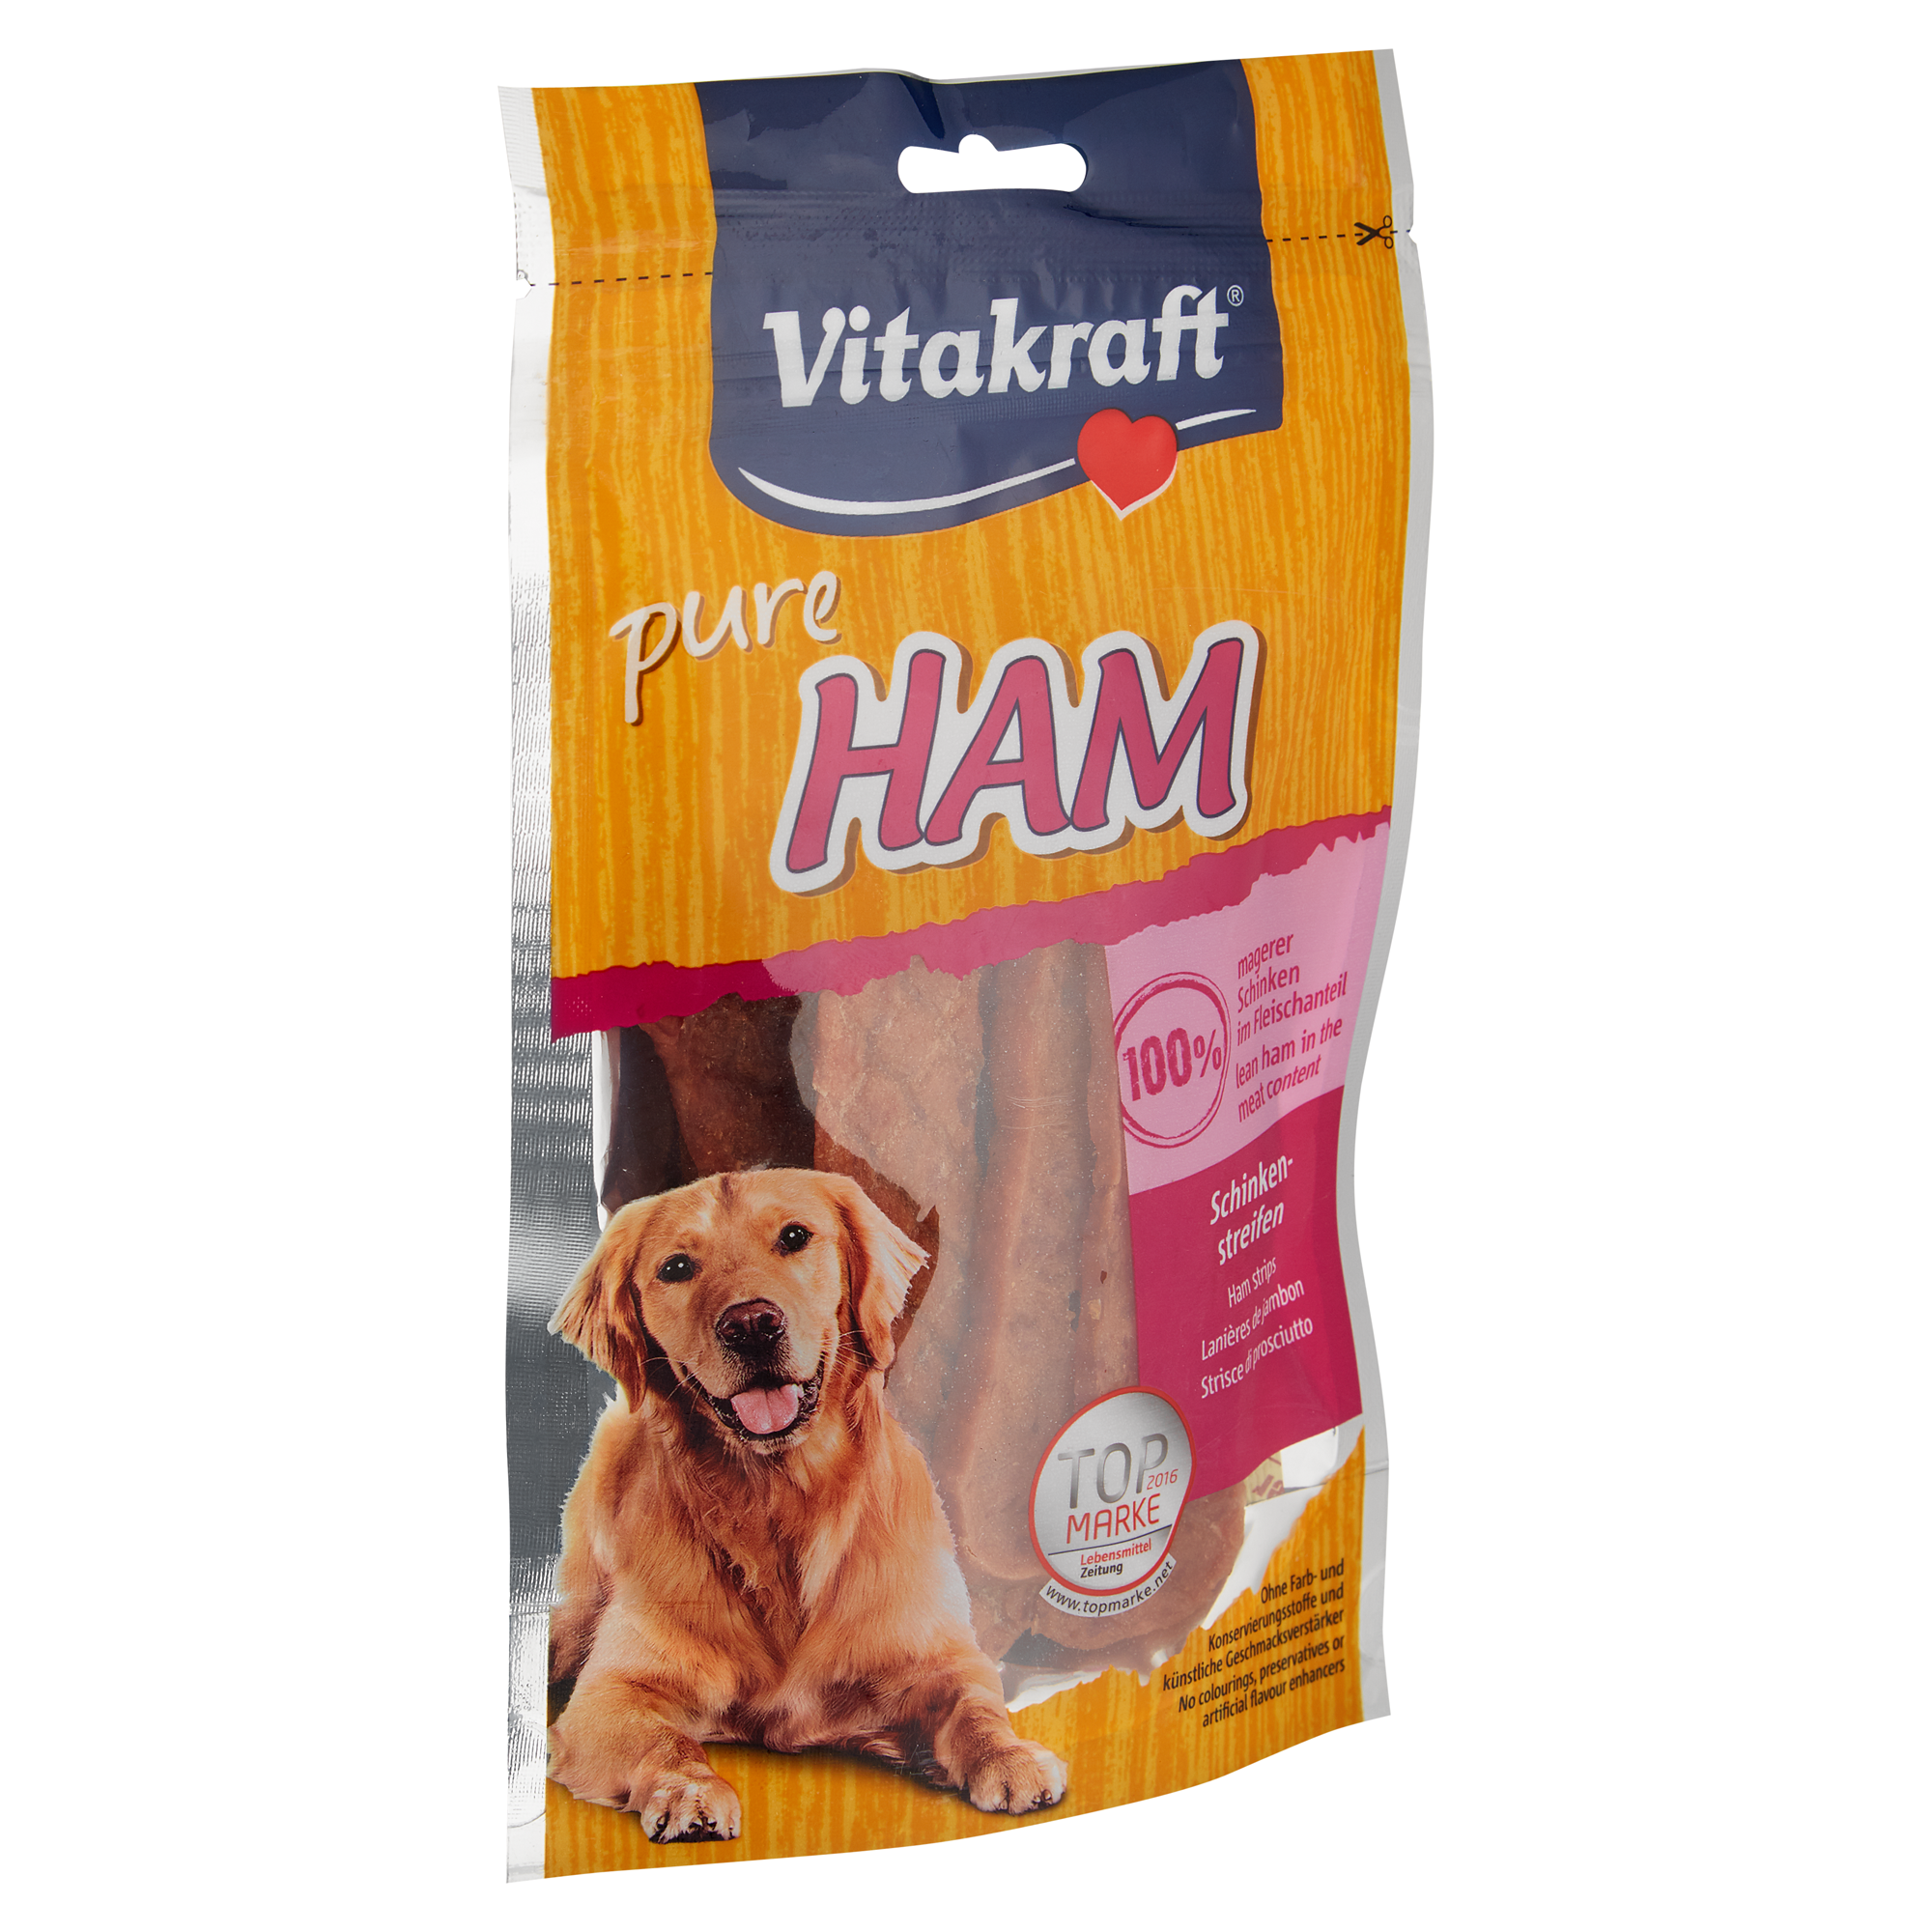 Hundesnack "Pure" mit Schinken 80 g + product picture